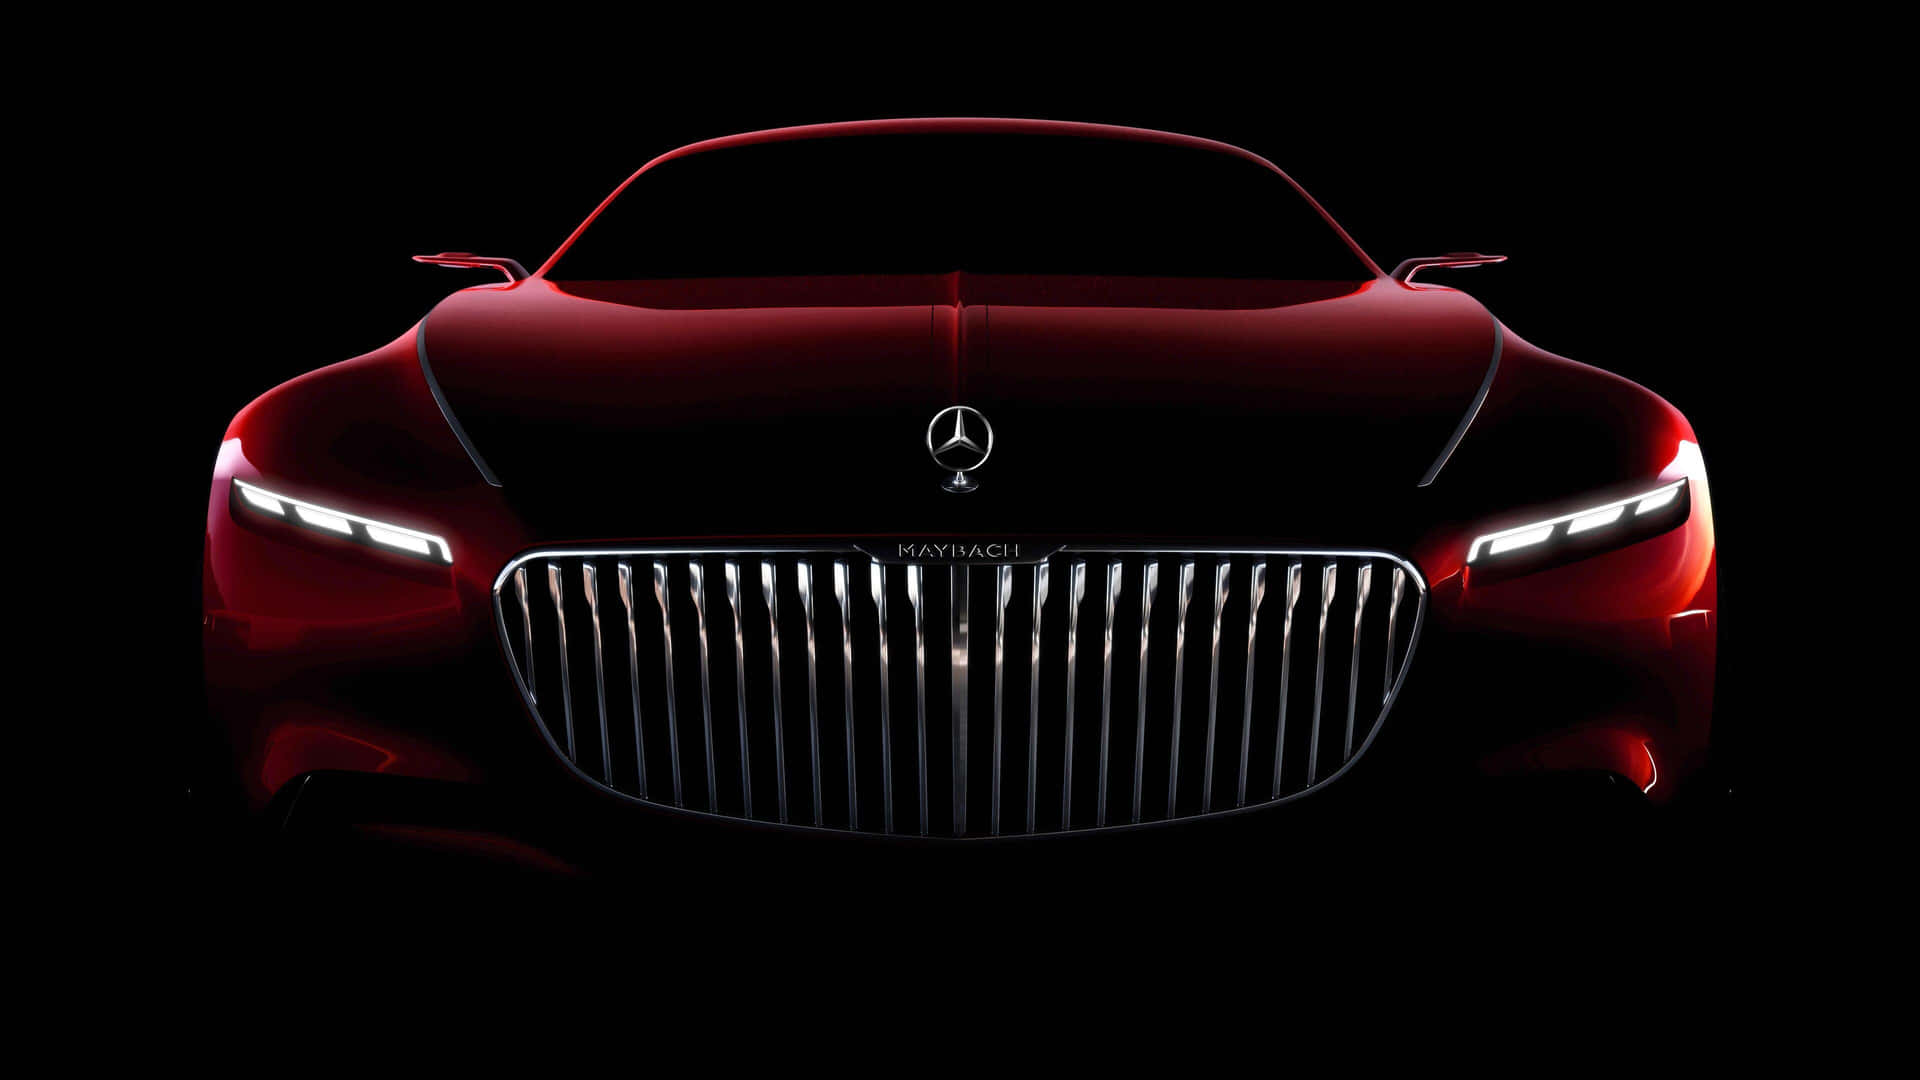 Free Mercedes Wallpaper Downloads, [300+] Mercedes Wallpapers for FREE |  